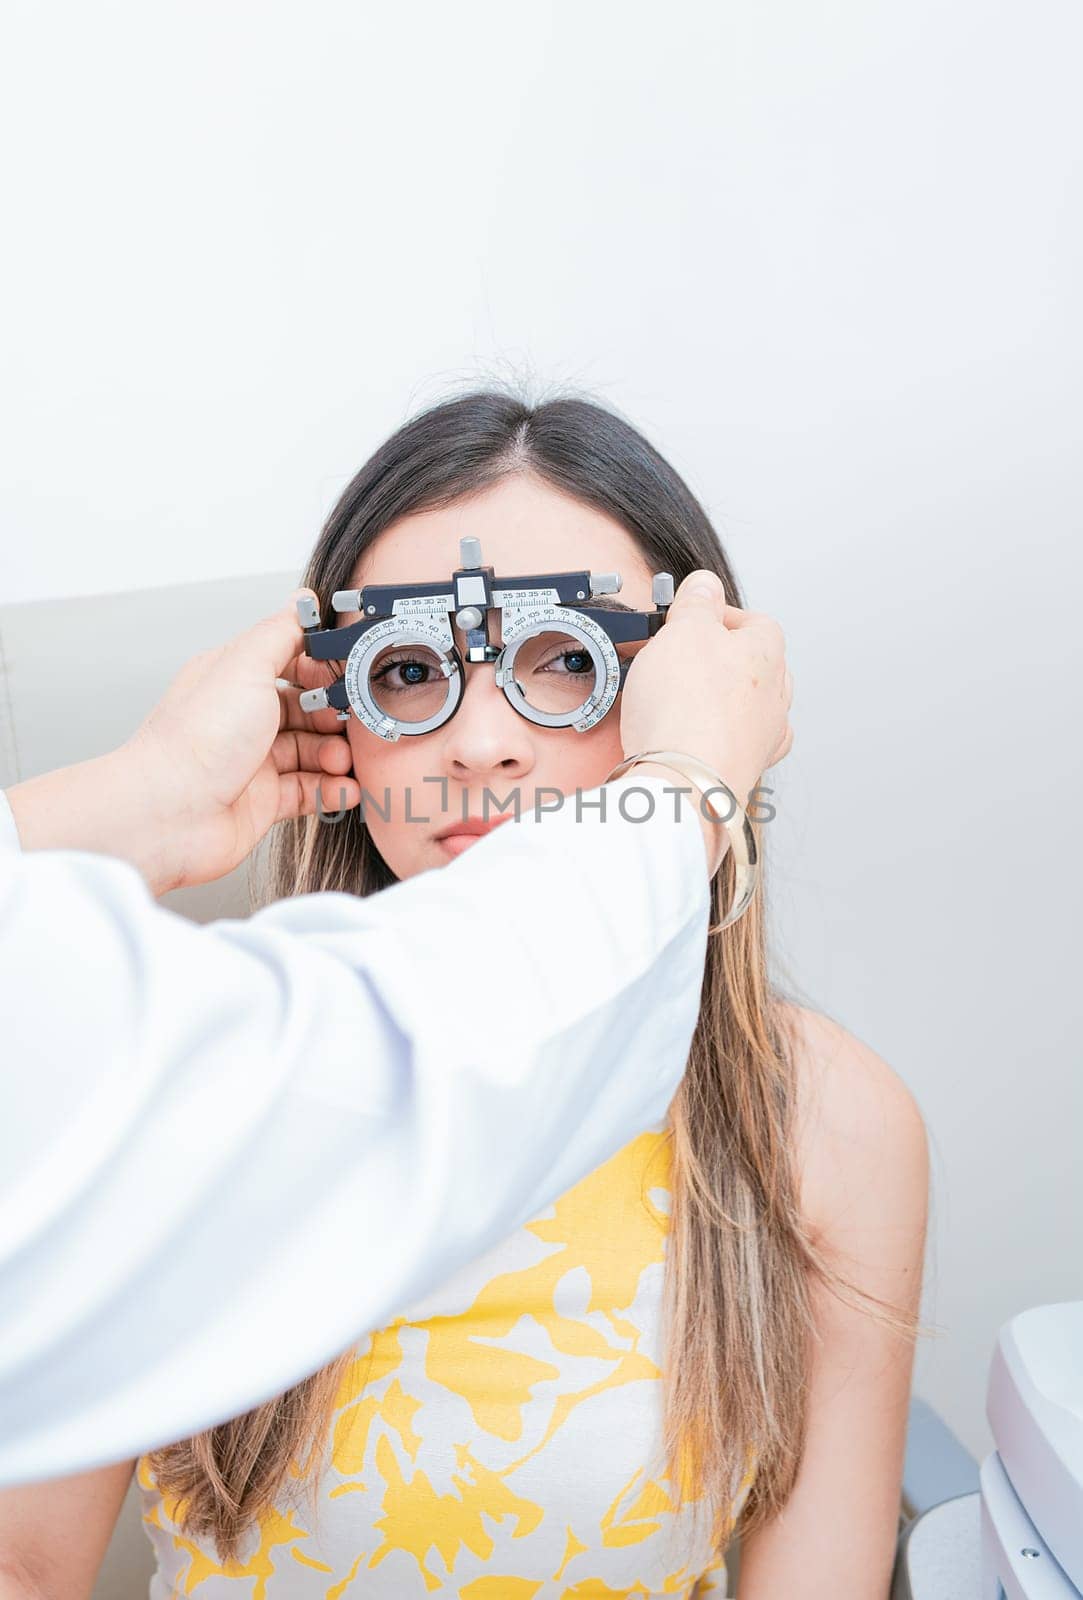 Doctor adjusting vision of patient with optometrist trial frame. ophthalmologist examining girl with optometrist trial frame by isaiphoto